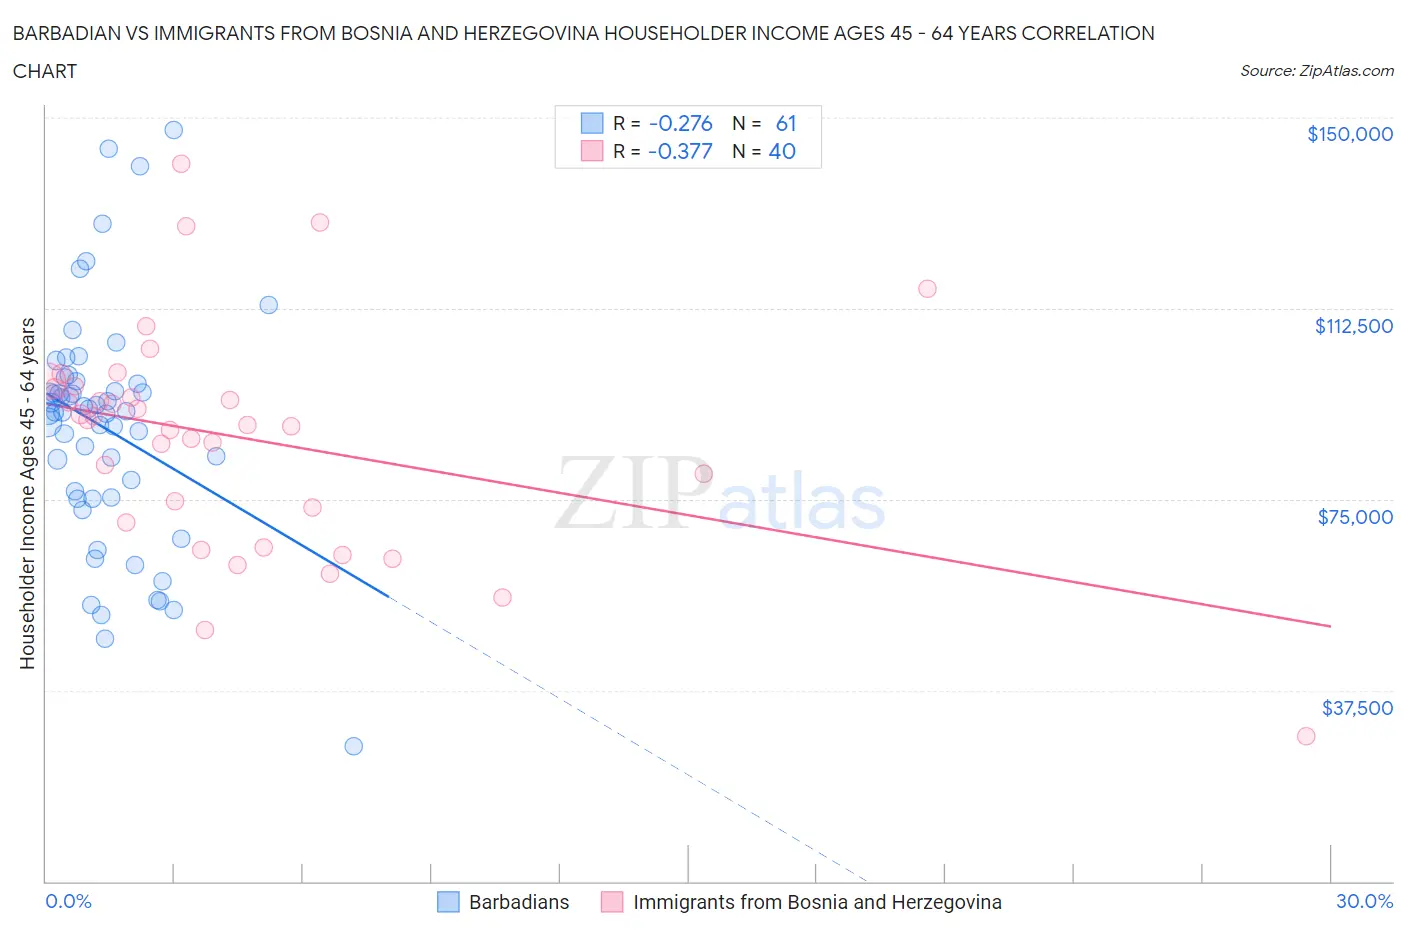 Barbadian vs Immigrants from Bosnia and Herzegovina Householder Income Ages 45 - 64 years